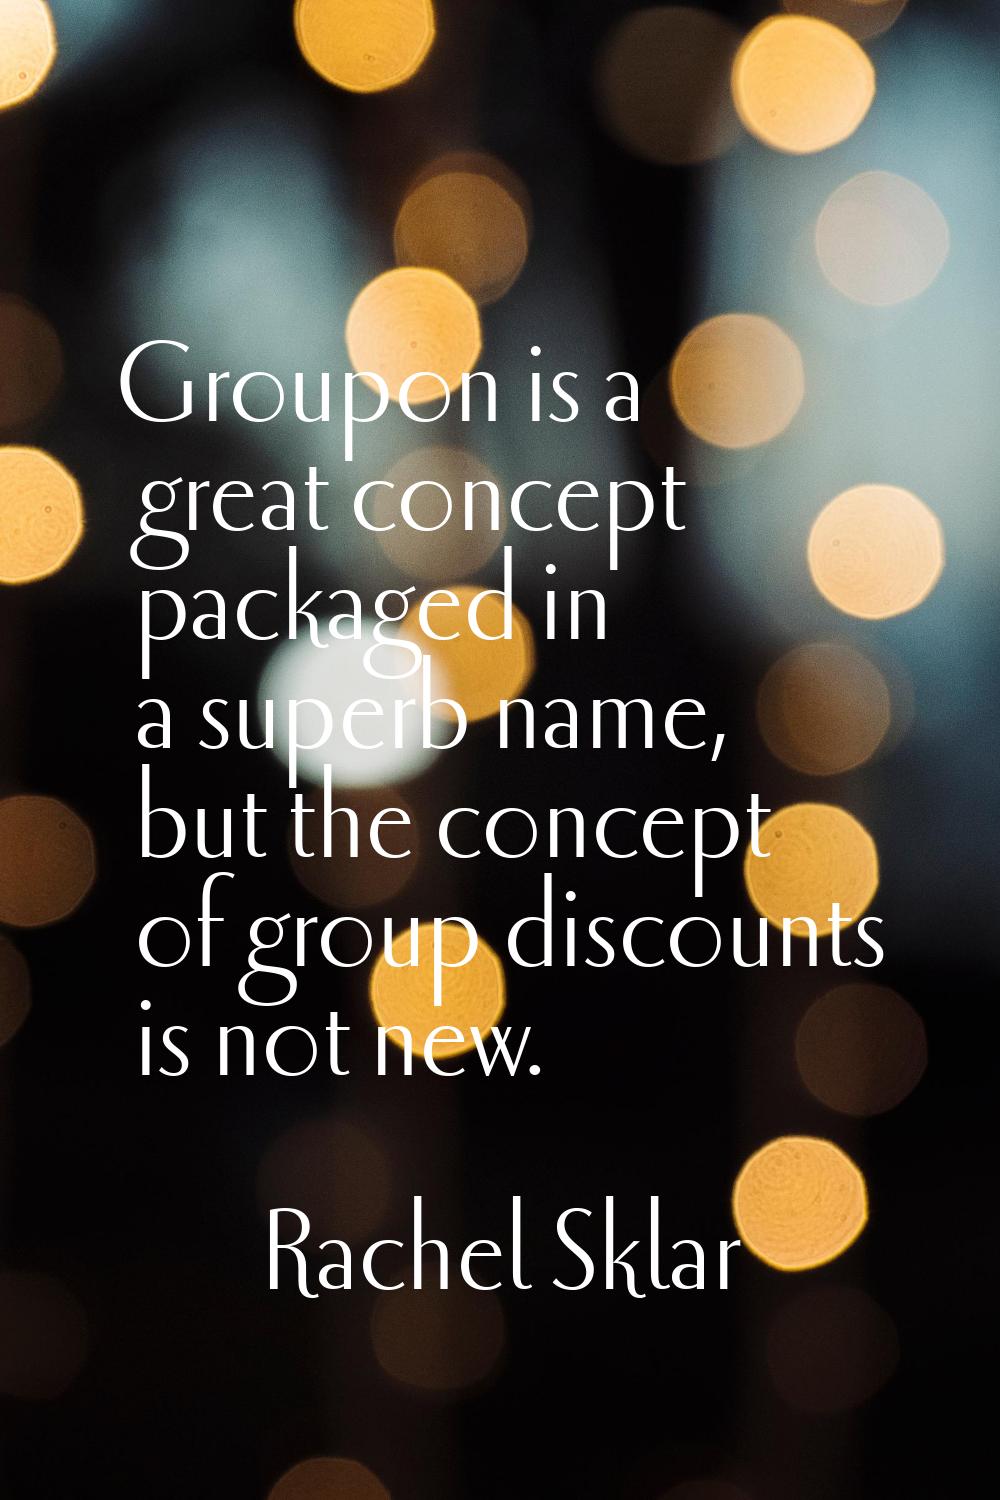 Groupon is a great concept packaged in a superb name, but the concept of group discounts is not new